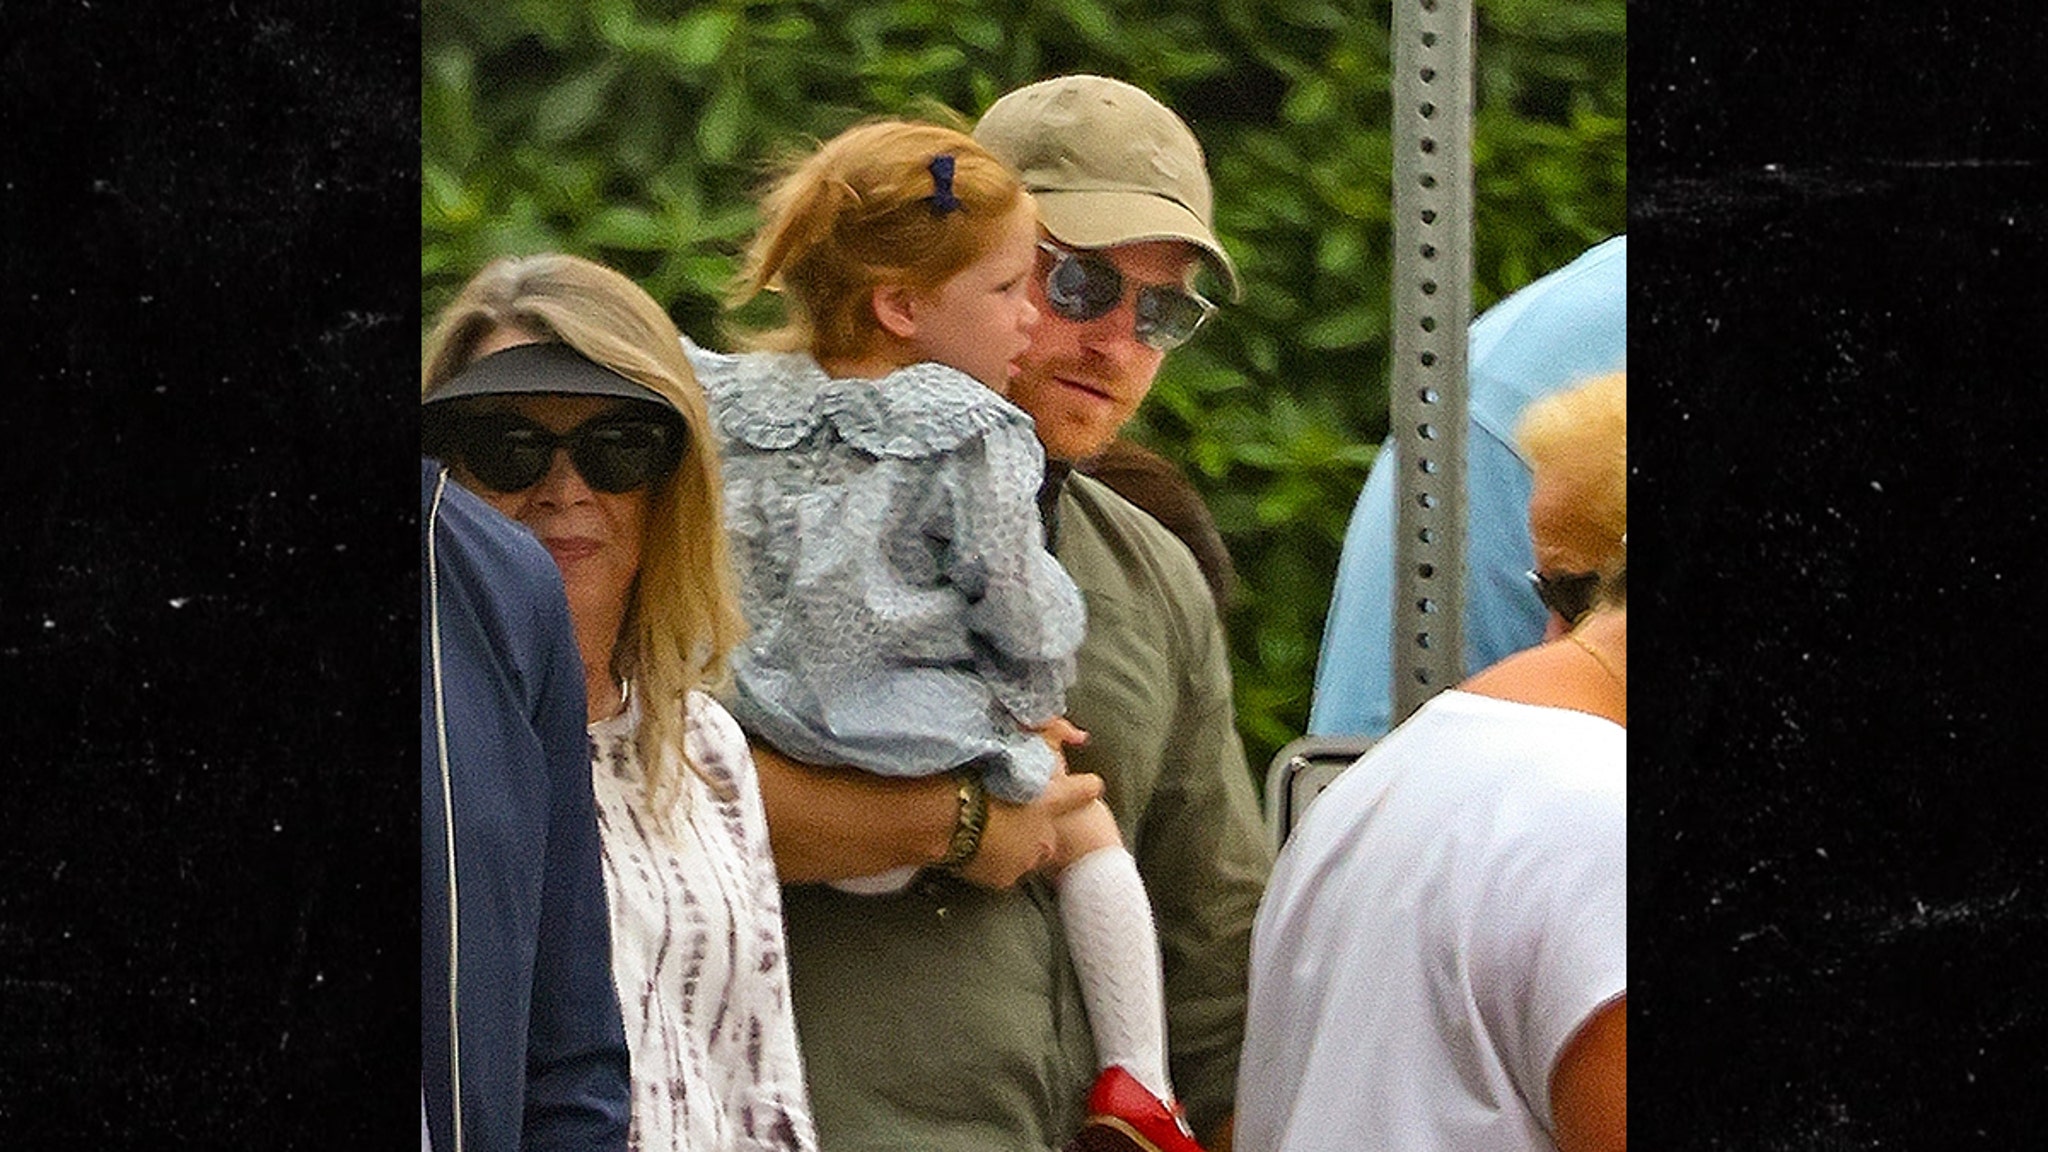 Prince Harry Takes in 4th of July Parade in Montecito with Daughter Lilibet